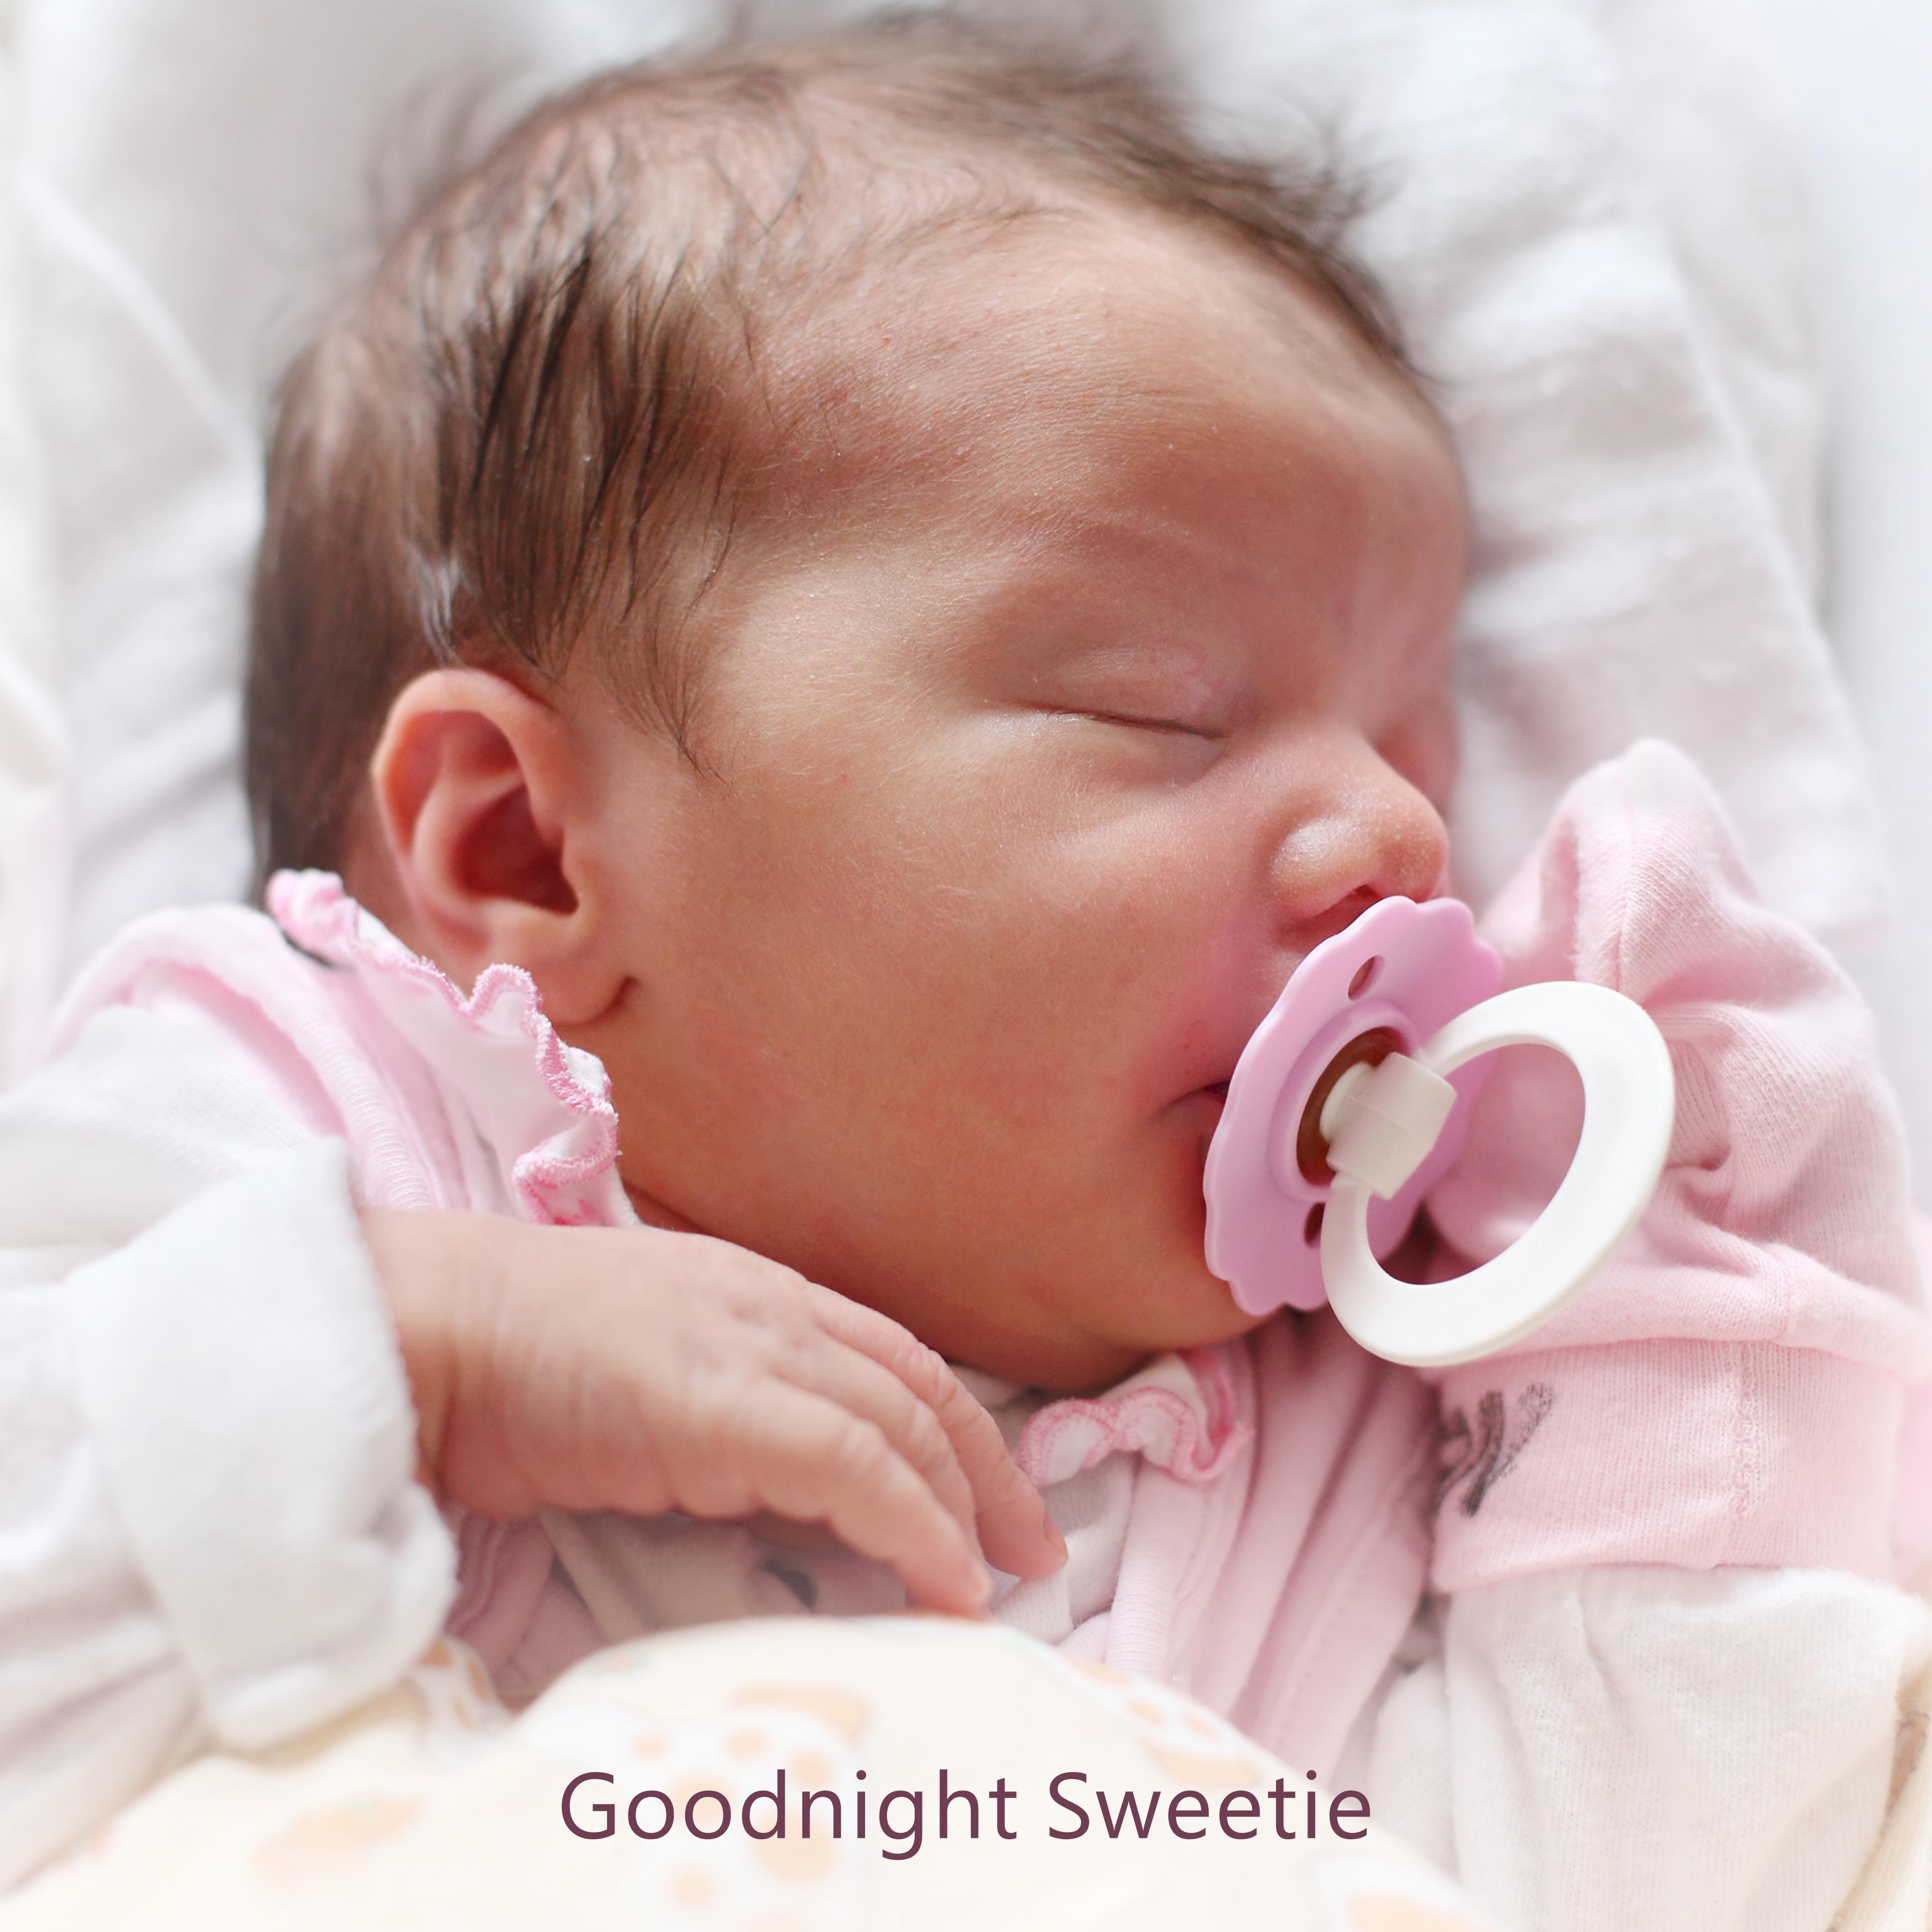 Goodnight Sweetie: The Most Beautiful Melodies to Sleep and Naps for Your Baby